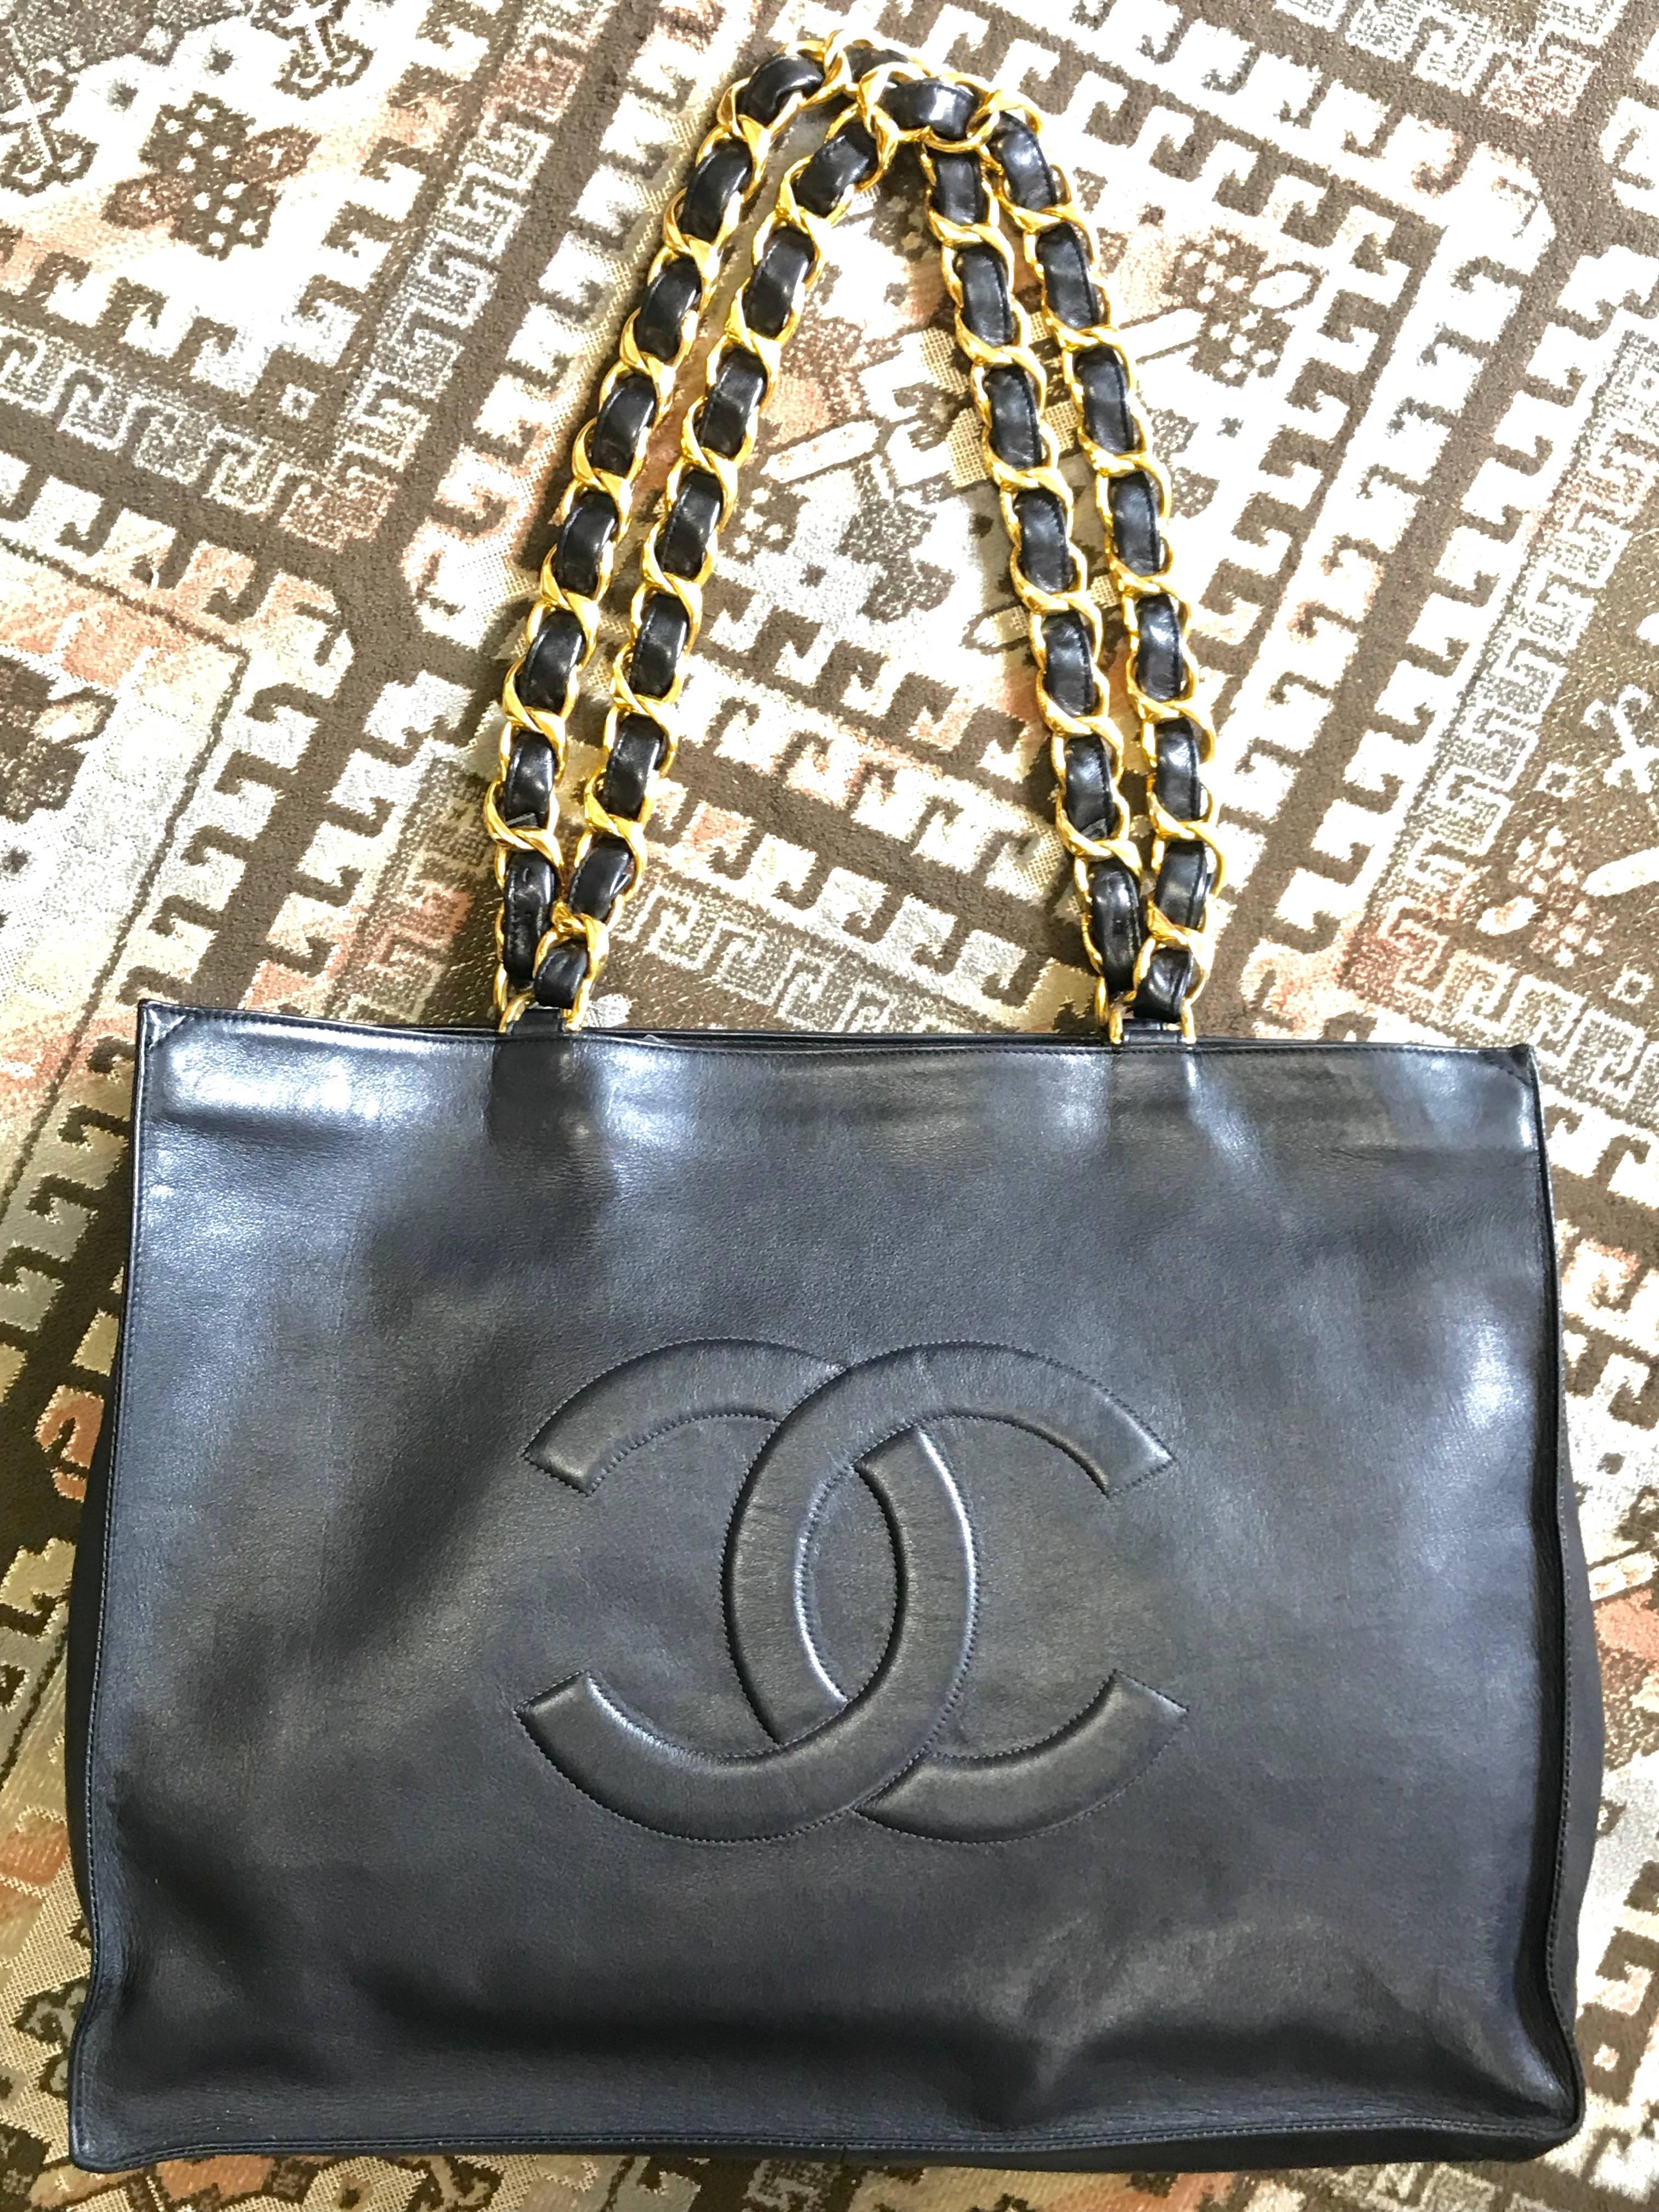 1990s. Vintage CHANEL black calfskin large tote bag with gold tone chain handles and CC motif. Classic and perfect purse for daily use. 

Vintage CHANEL black calfskin large tote bag with gold tone chain handles and CC motif. 

Classic purse for